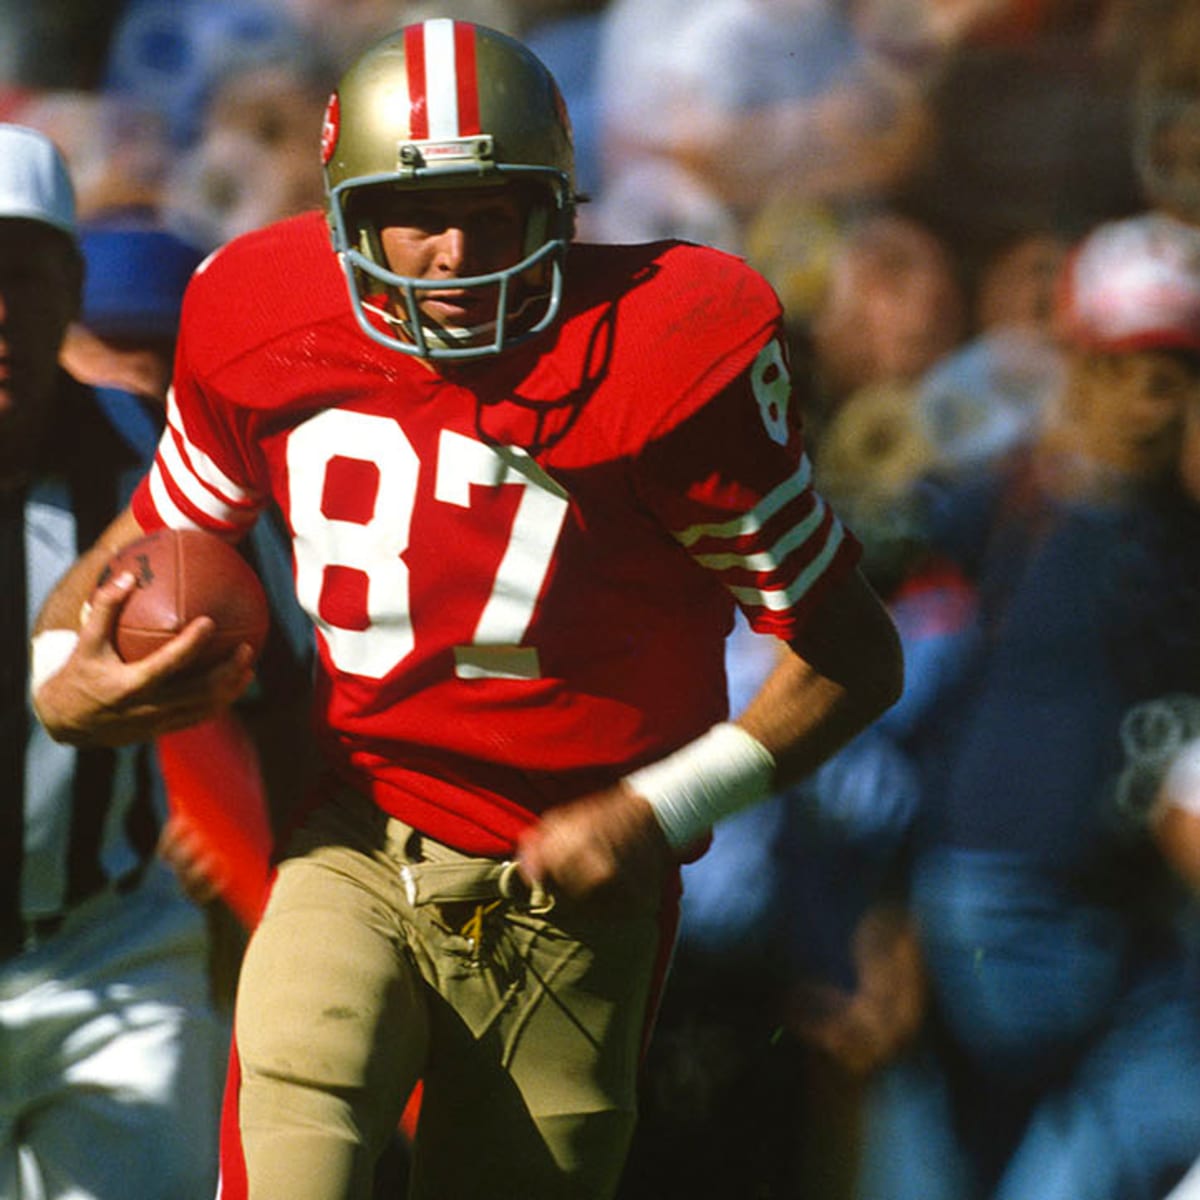 The late 49er Dwight Clark: A hero in the ALS community